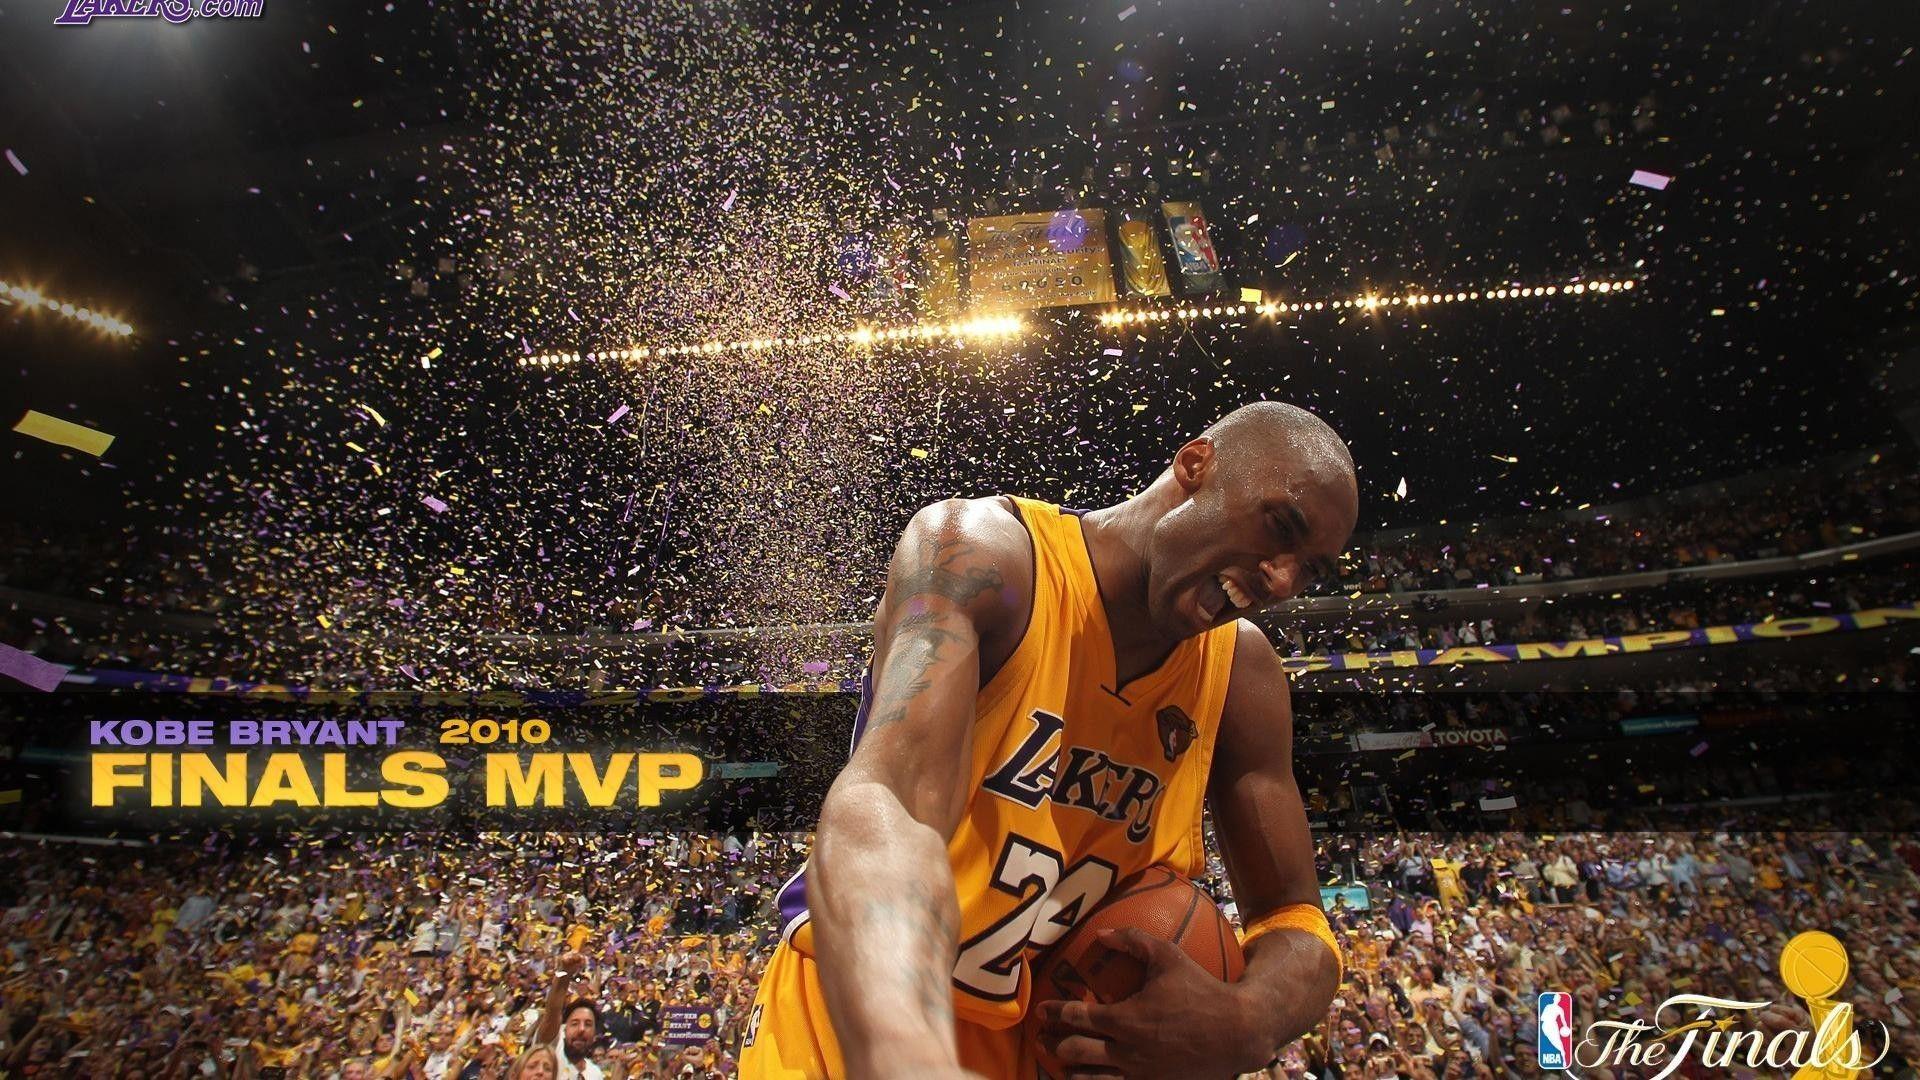 180+ Kobe Bryant HD Wallpapers and Backgrounds